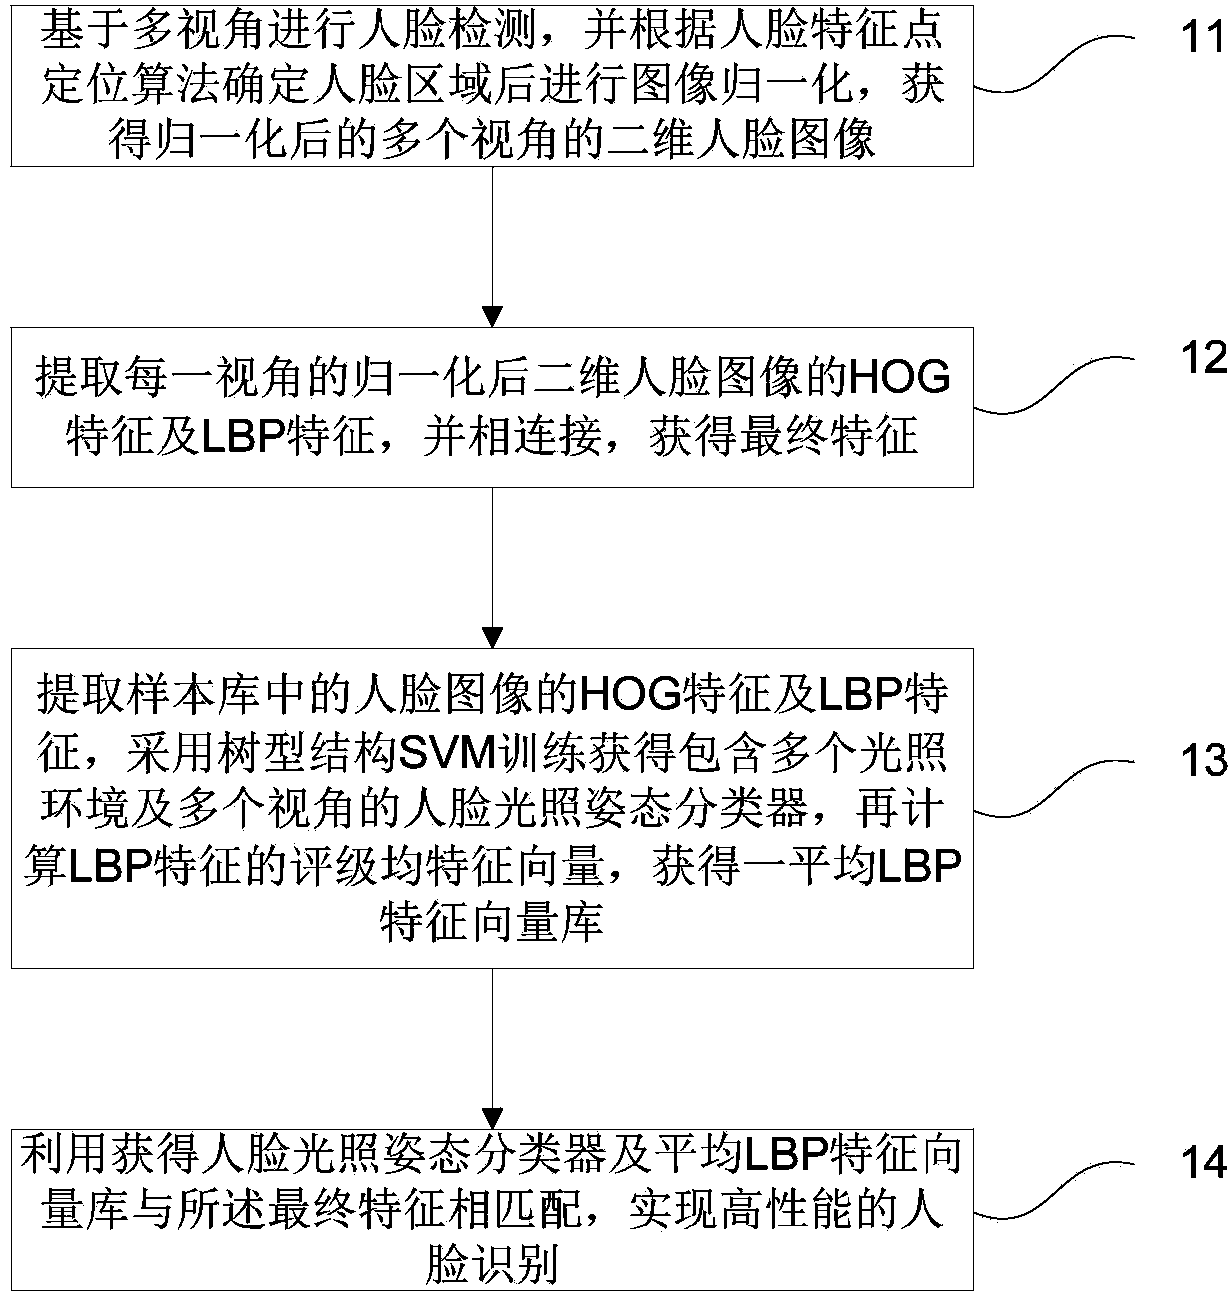 High-performance human face recognition method and system